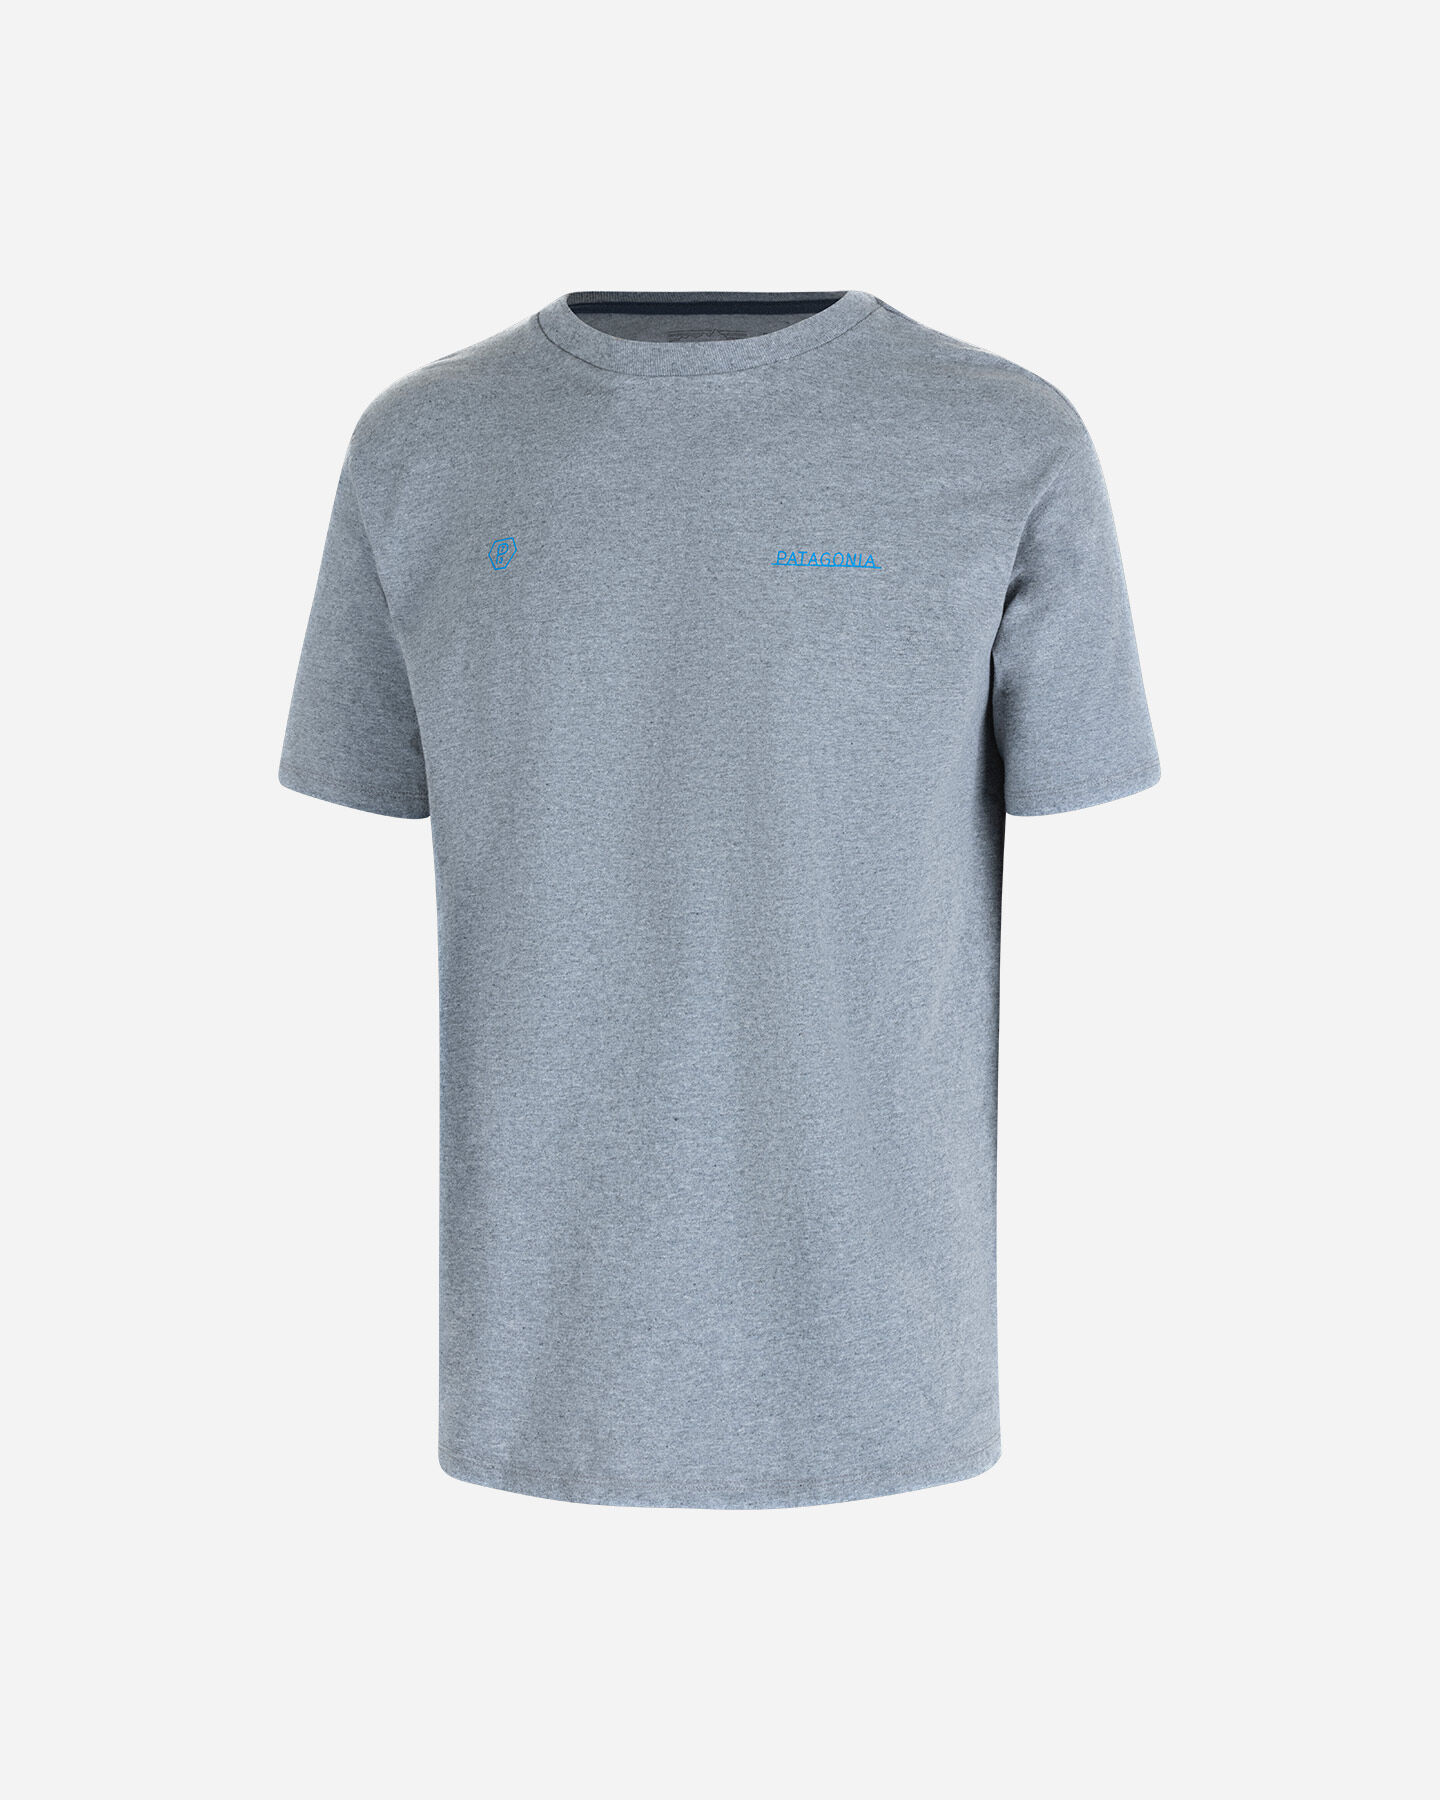  T-Shirt PATAGONIA FORGE MARK M S5445226|GLH|XS scatto 0